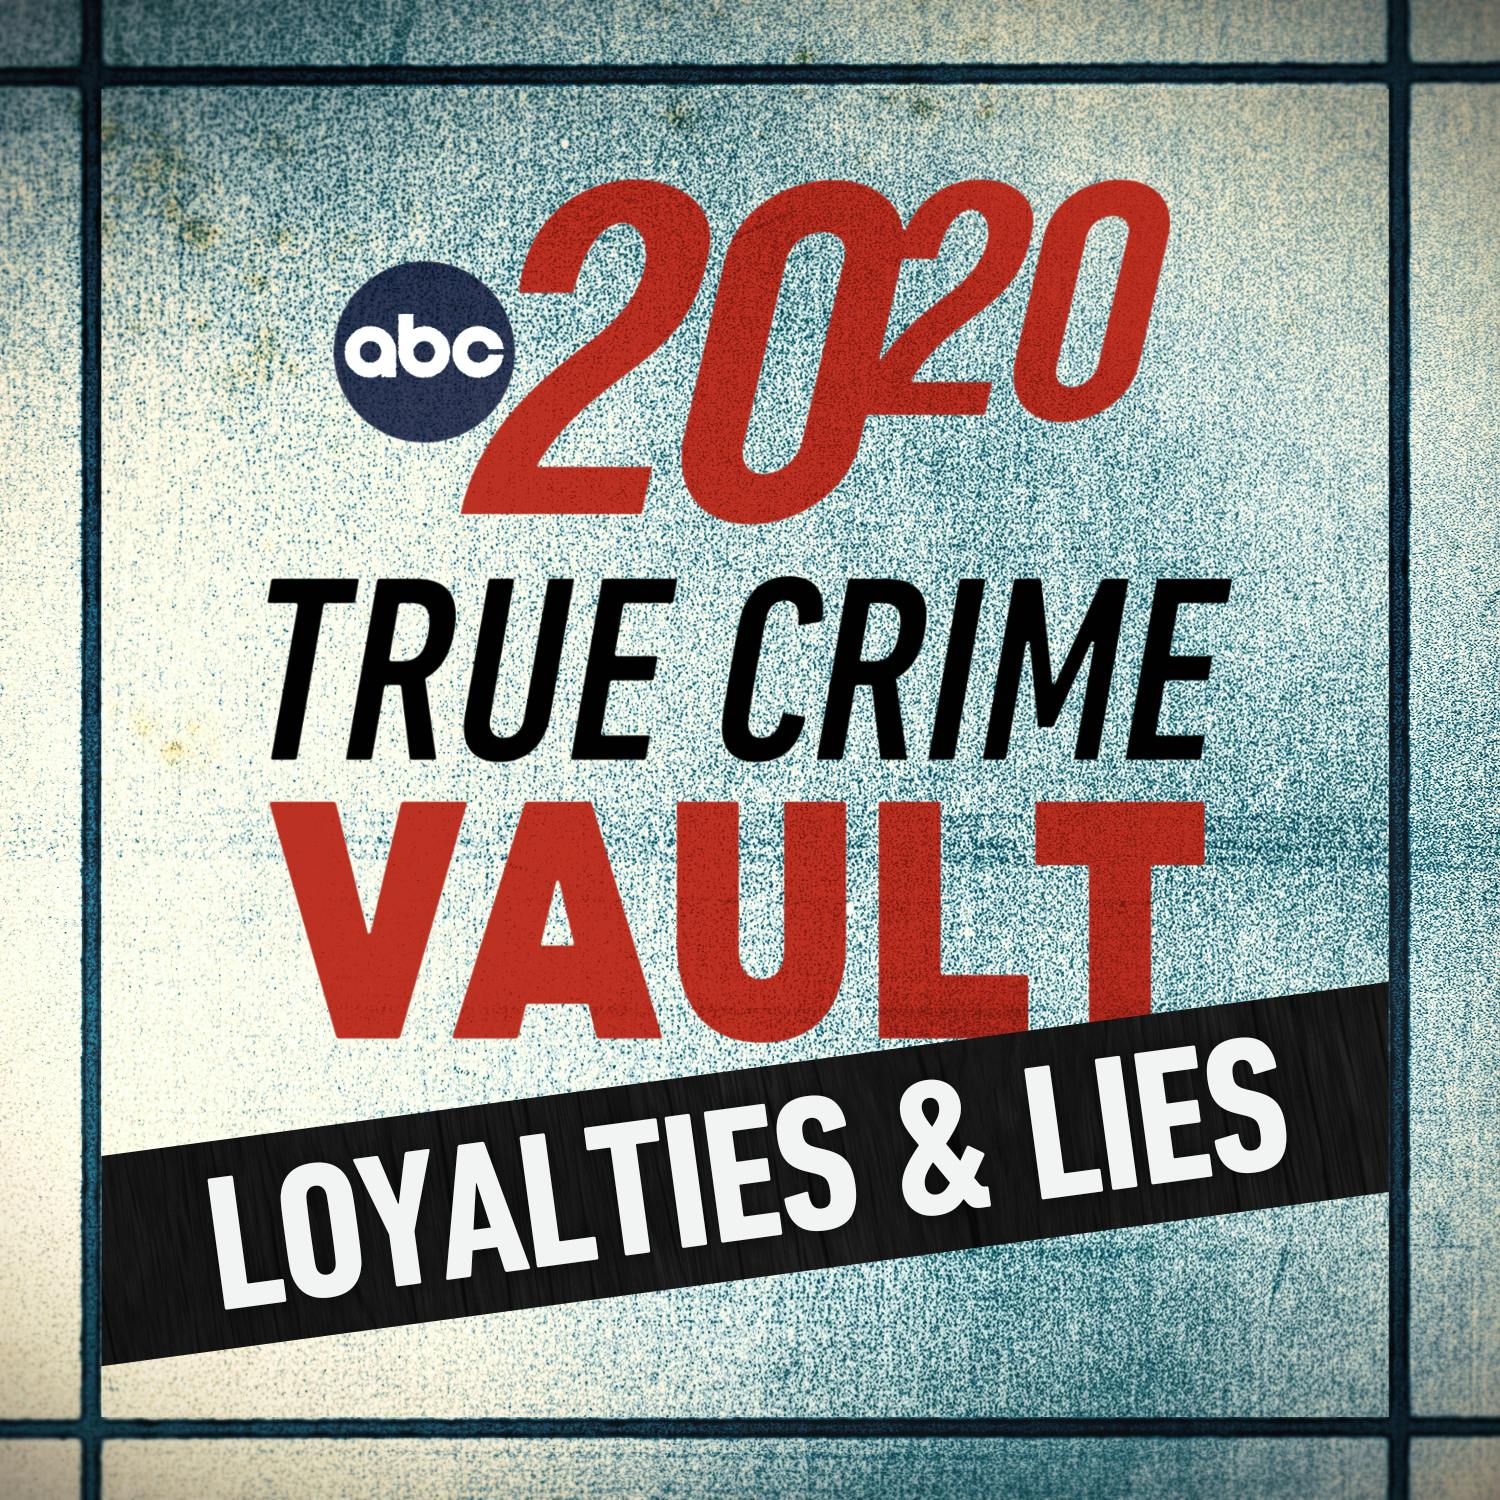 True Crime Vault: Loyalties and Lies by ABC News